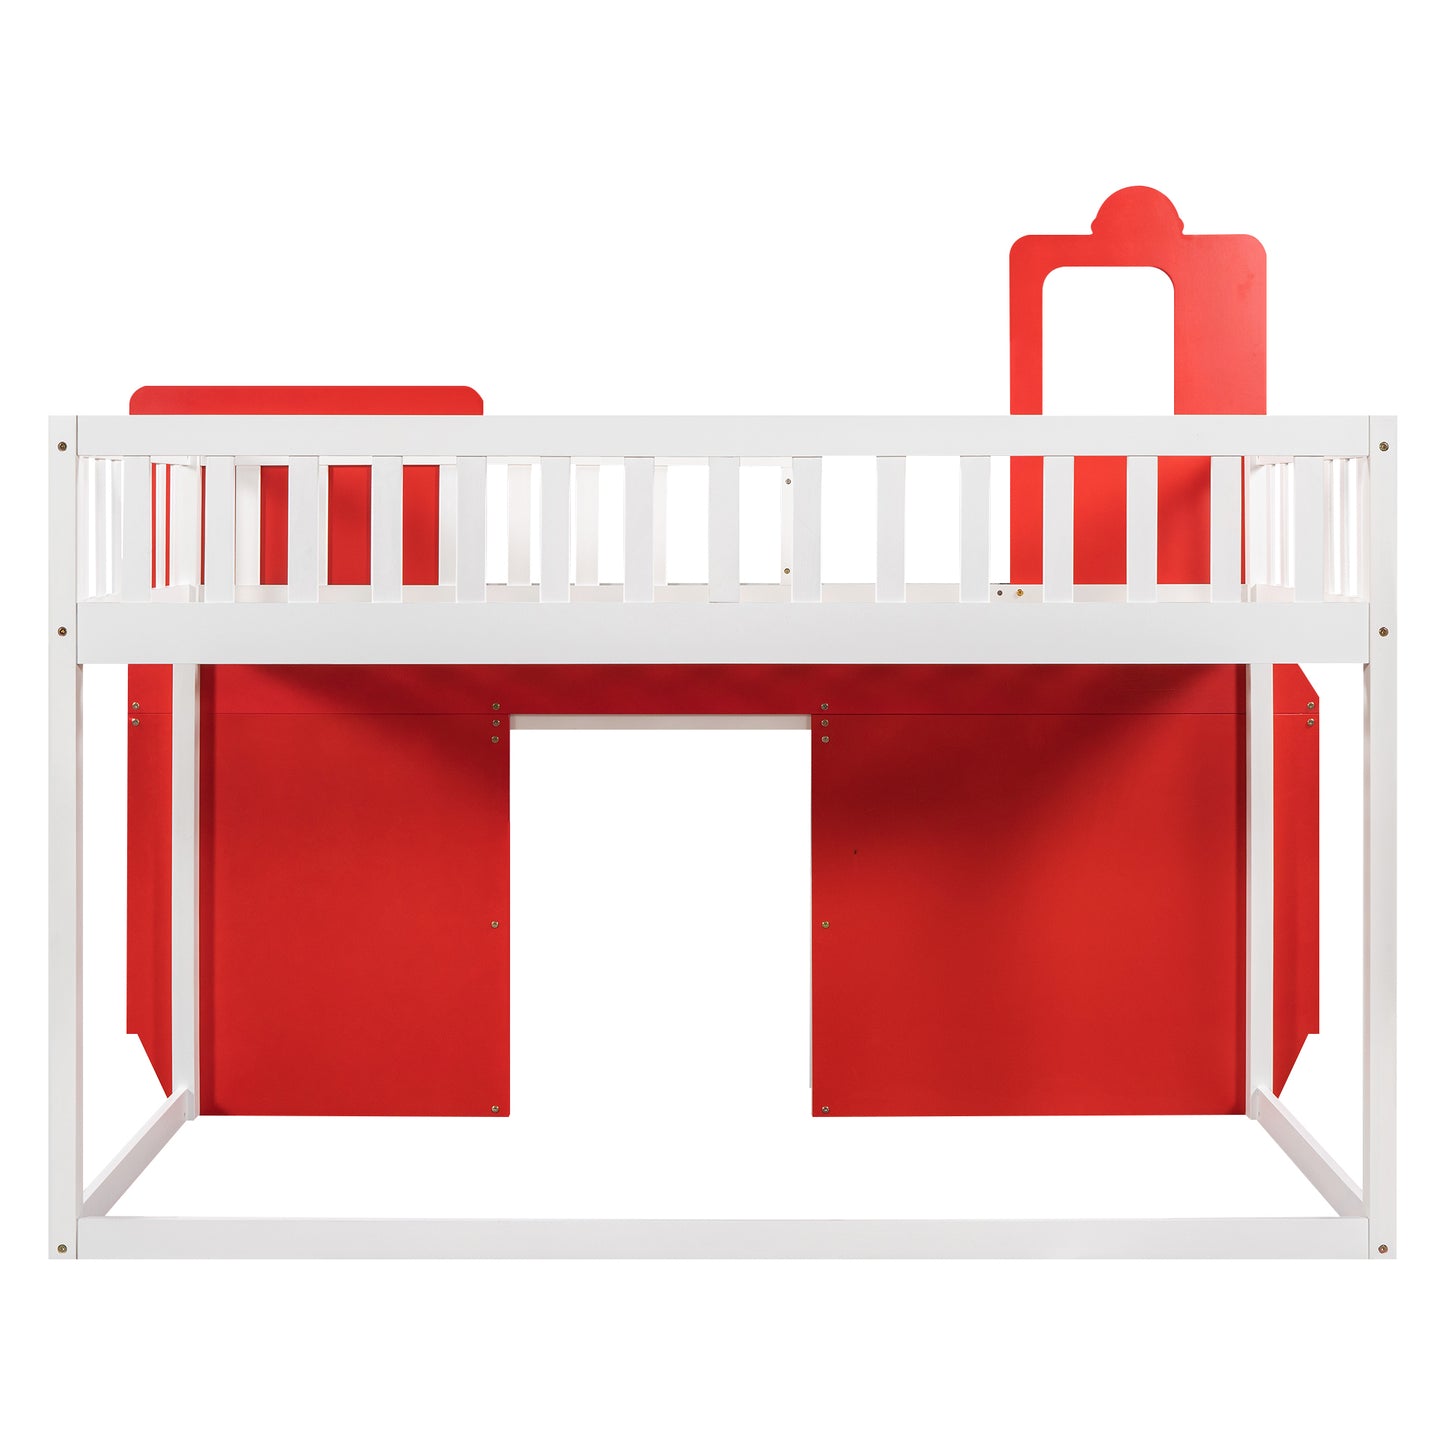 Twin Size Bus Shaped Loft Bed with Underbed Storage Space,Red